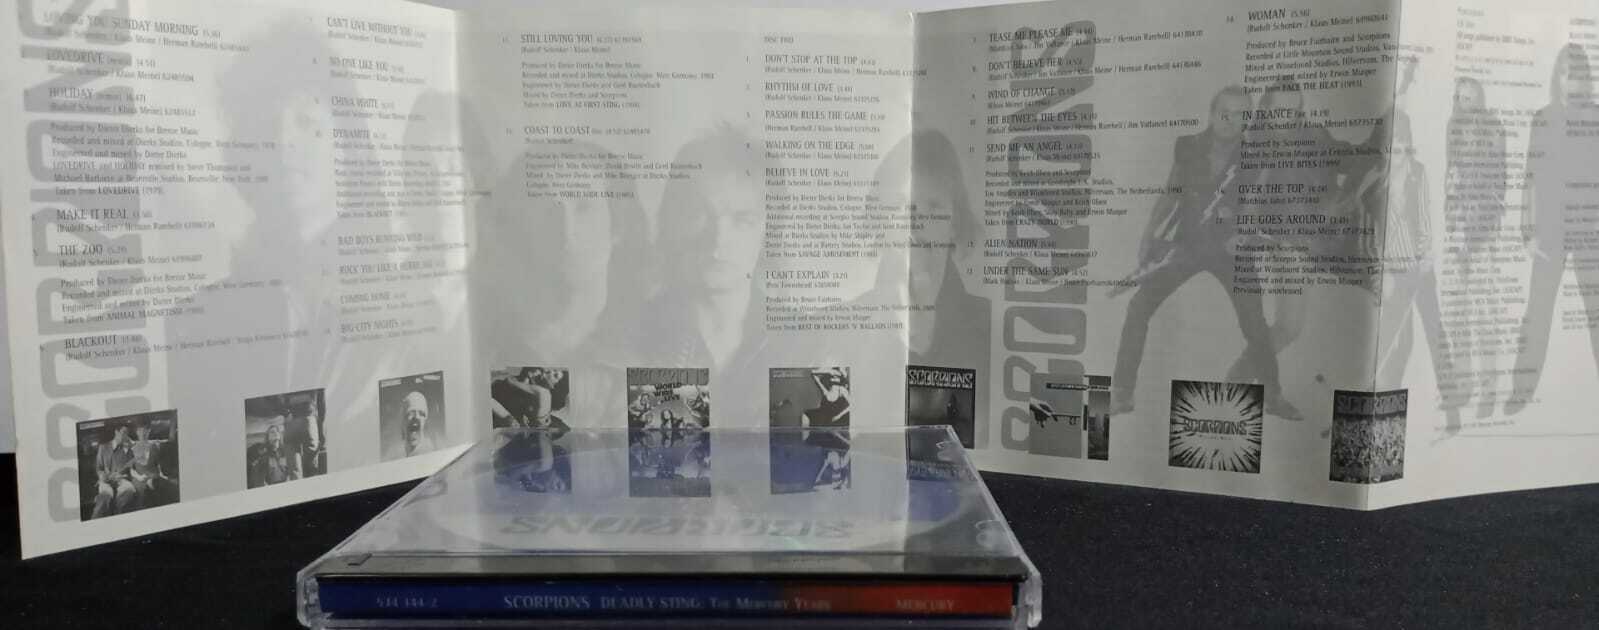 CD - Scorpions - Deadly Sting The Mercury Years (duplo)